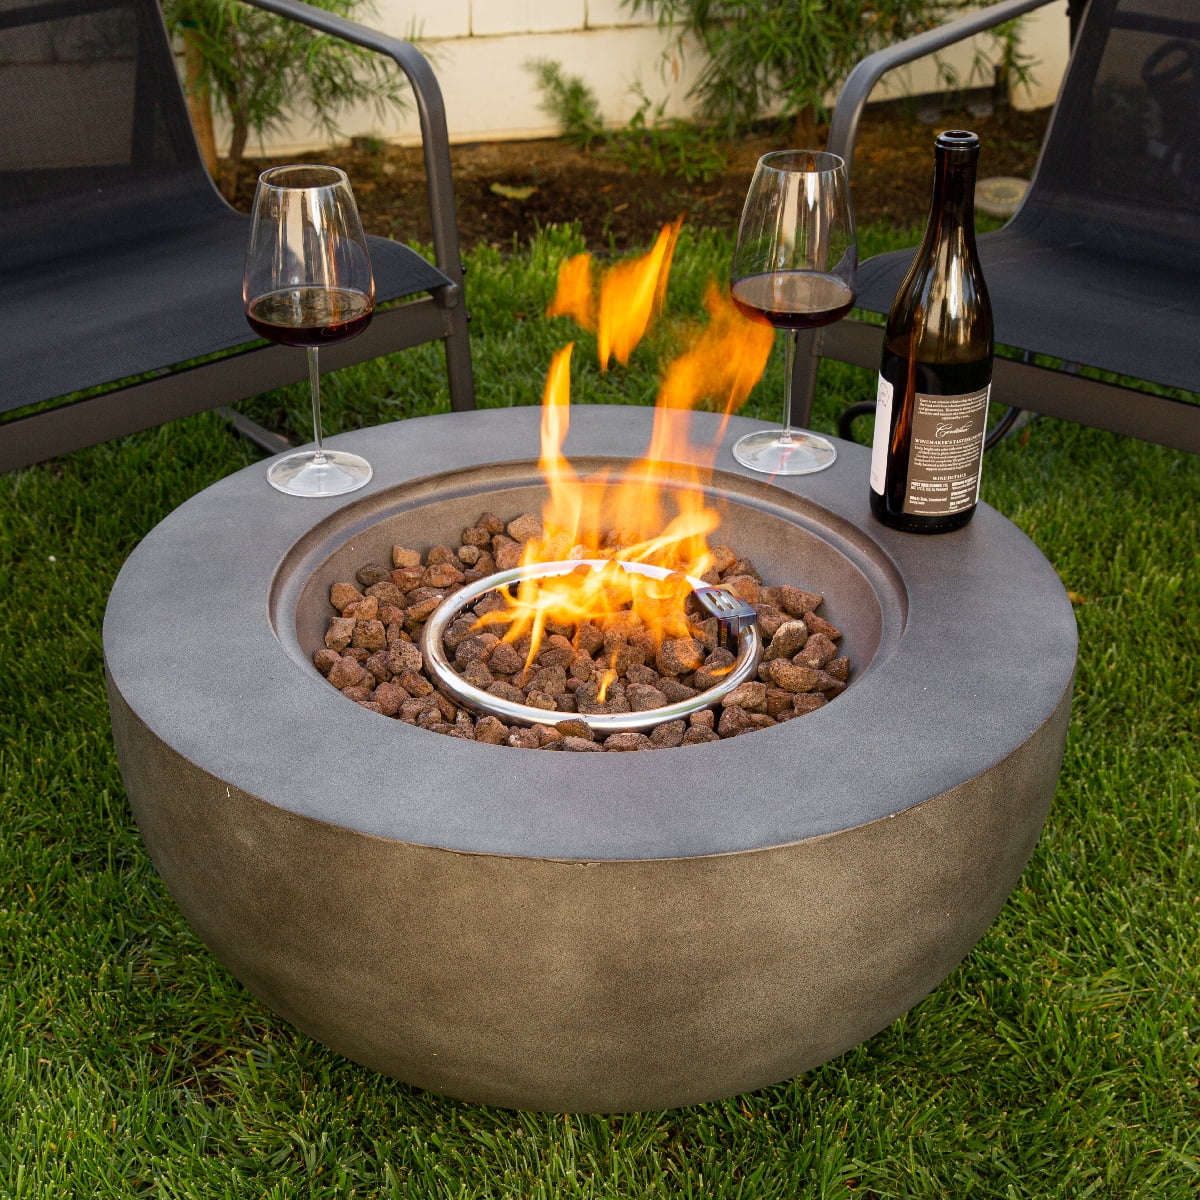 27 5 Outdoor Round Fire Pit Bowl, Outdoor Fire Pit With Glass Rocks